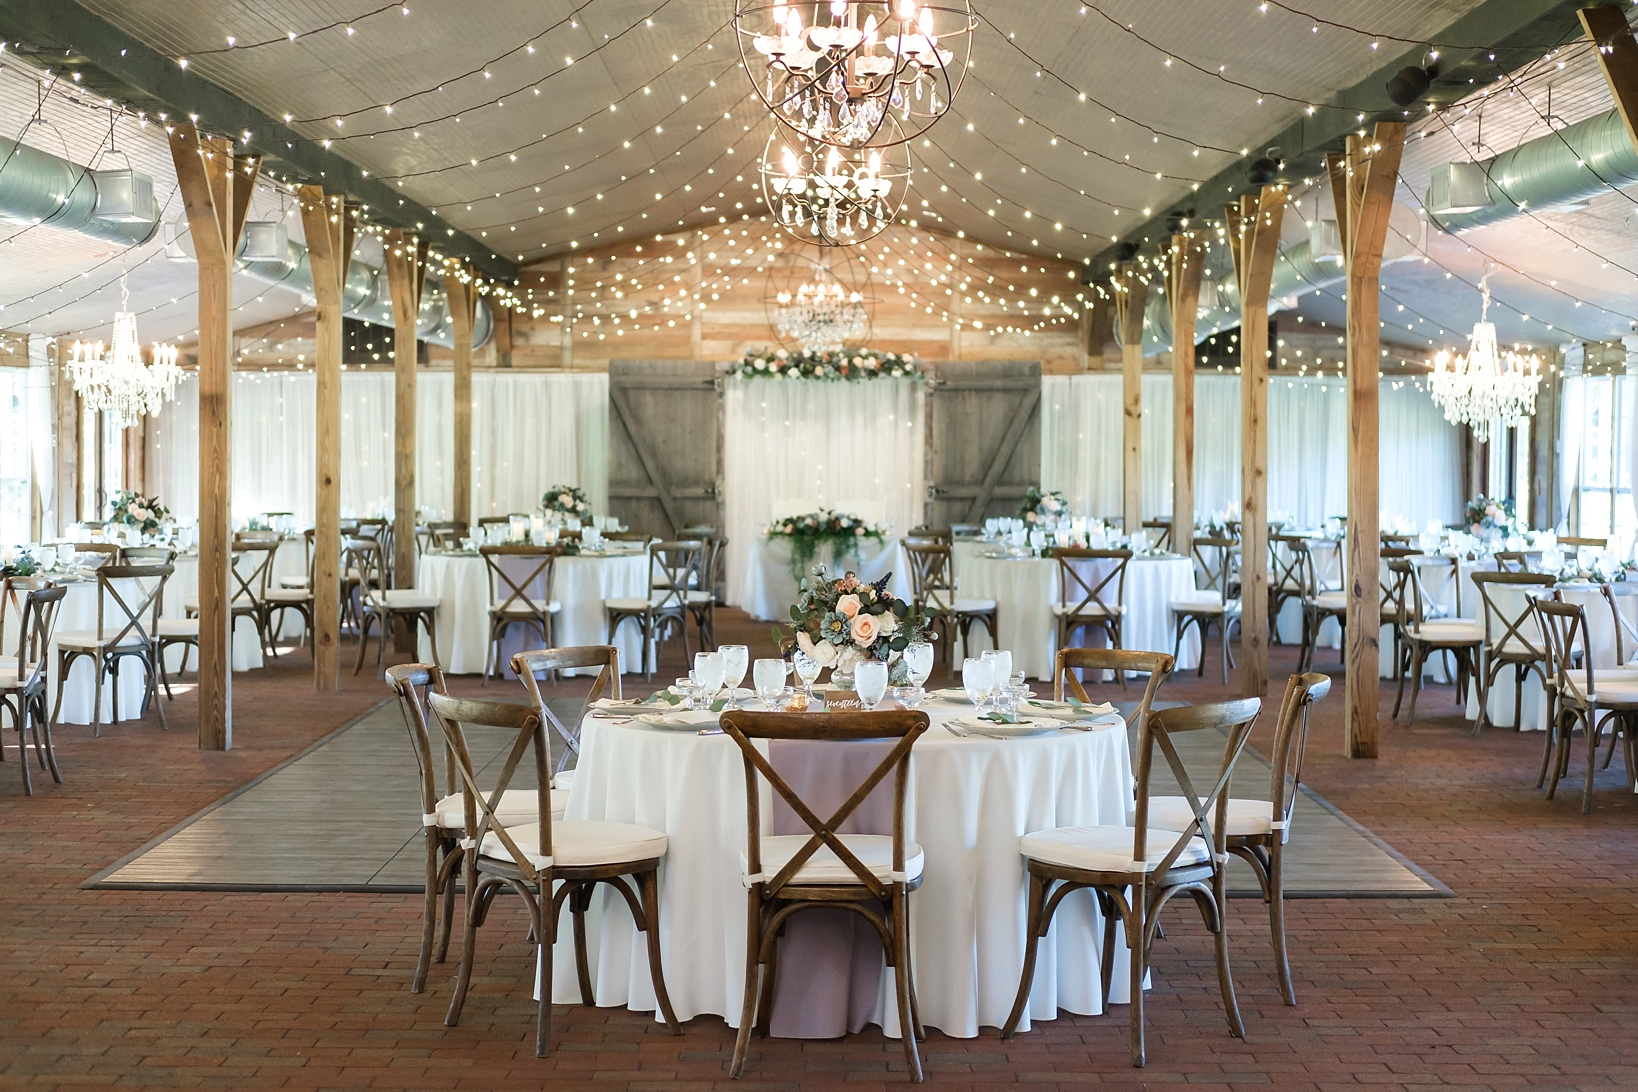 The reception venue at Cross Creek Ranch covered in string lights